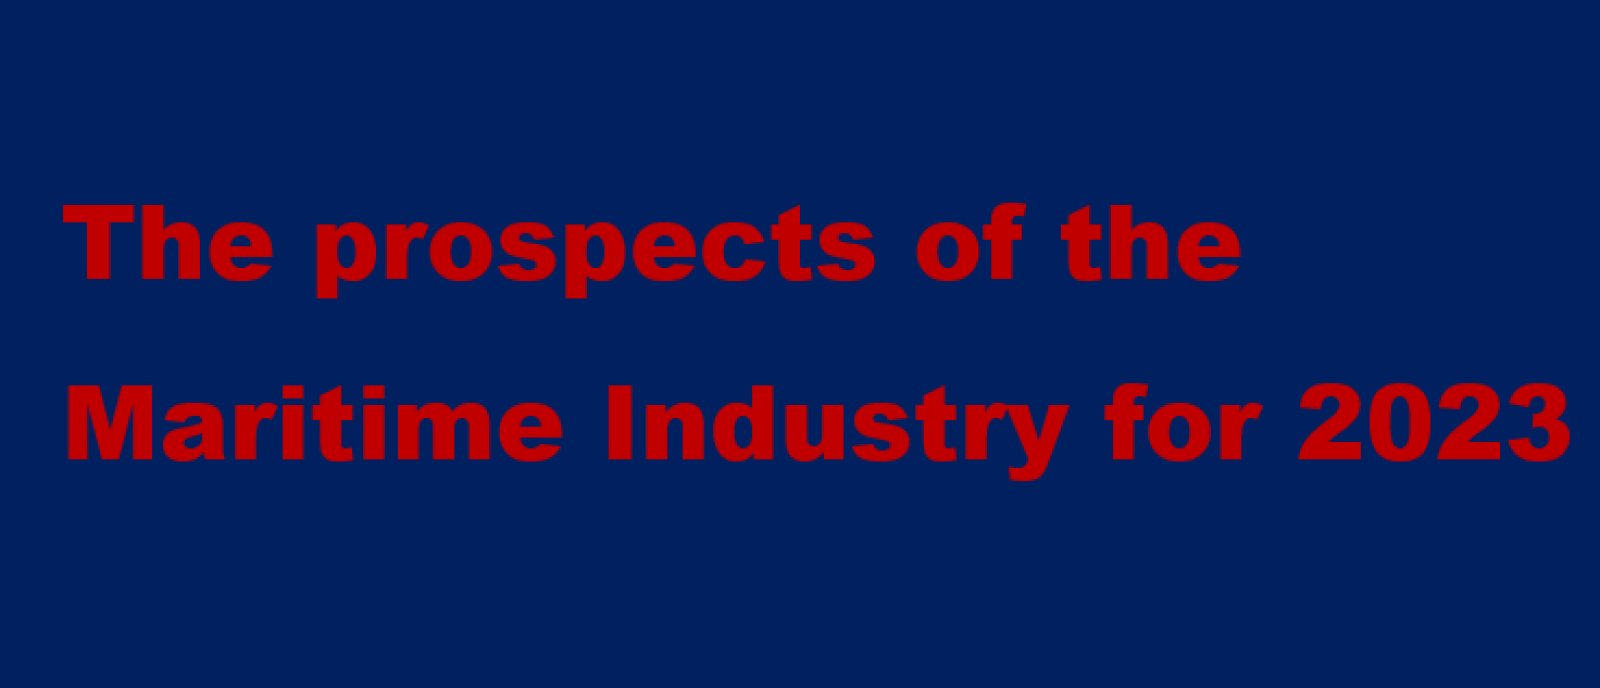 What are the prospects of the Maritime Industry for 2023?